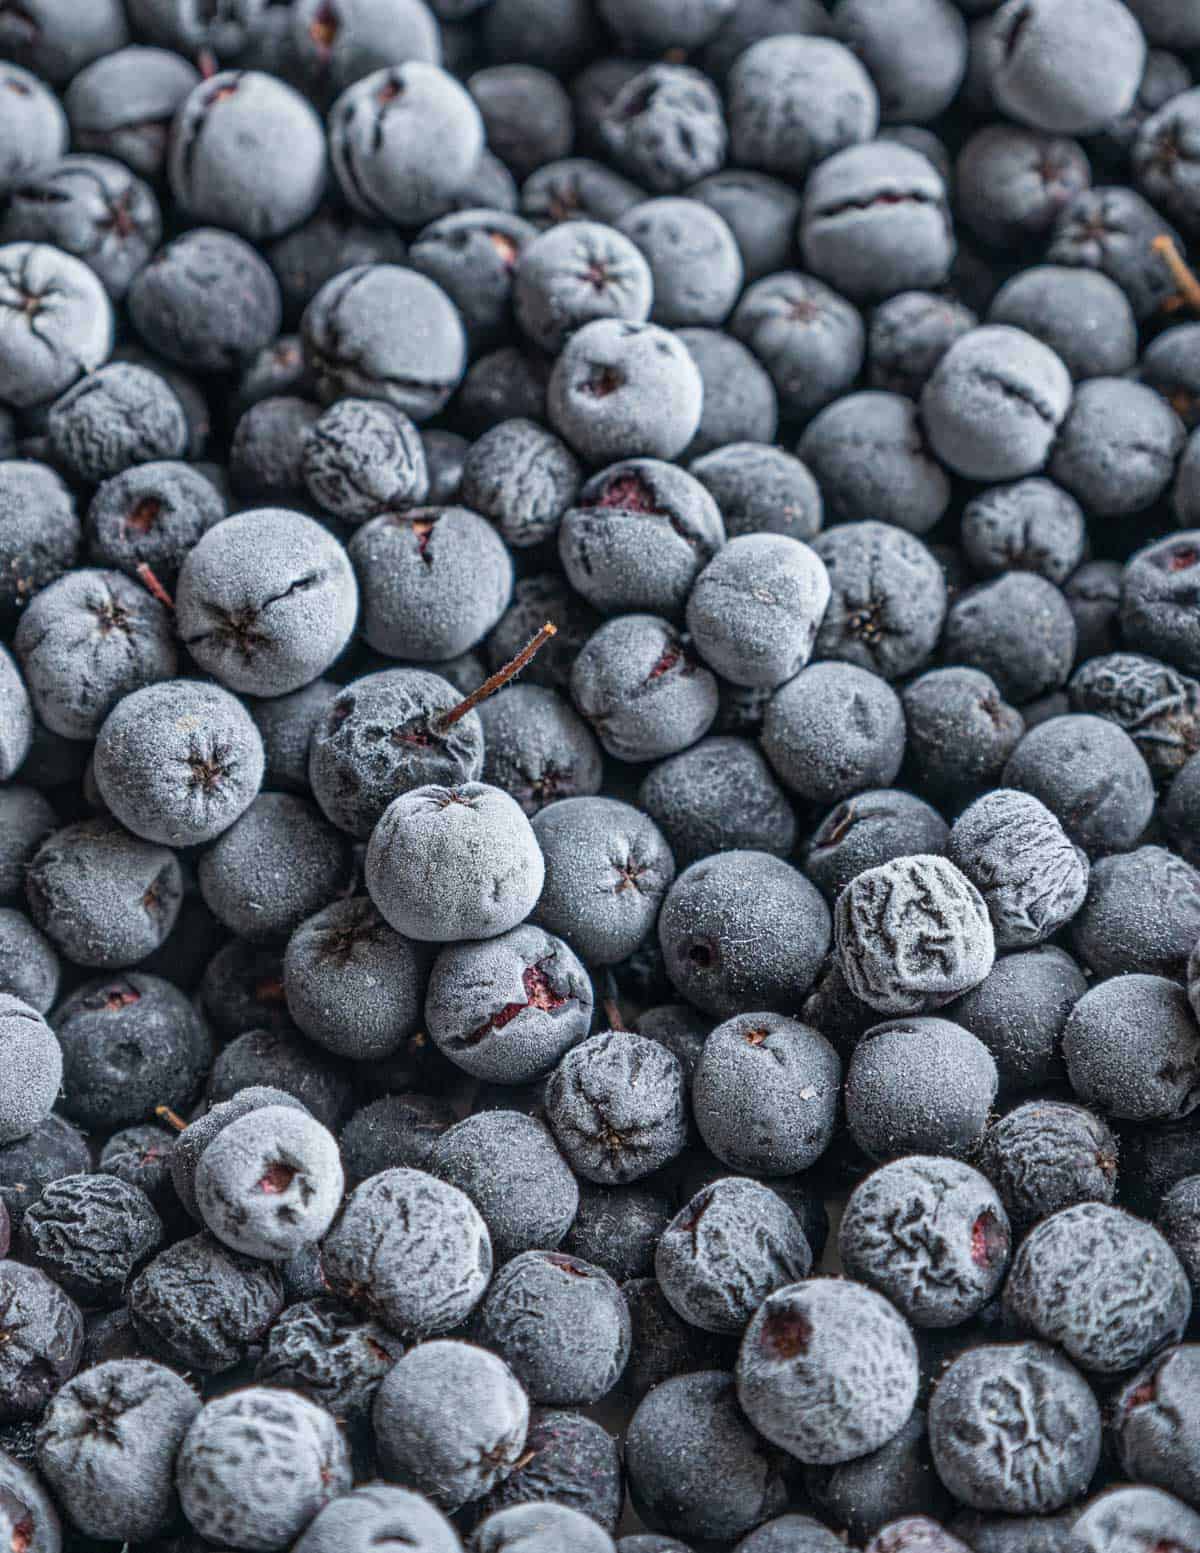 Frozen aronia berries or black chokeberries on a baking tray. 